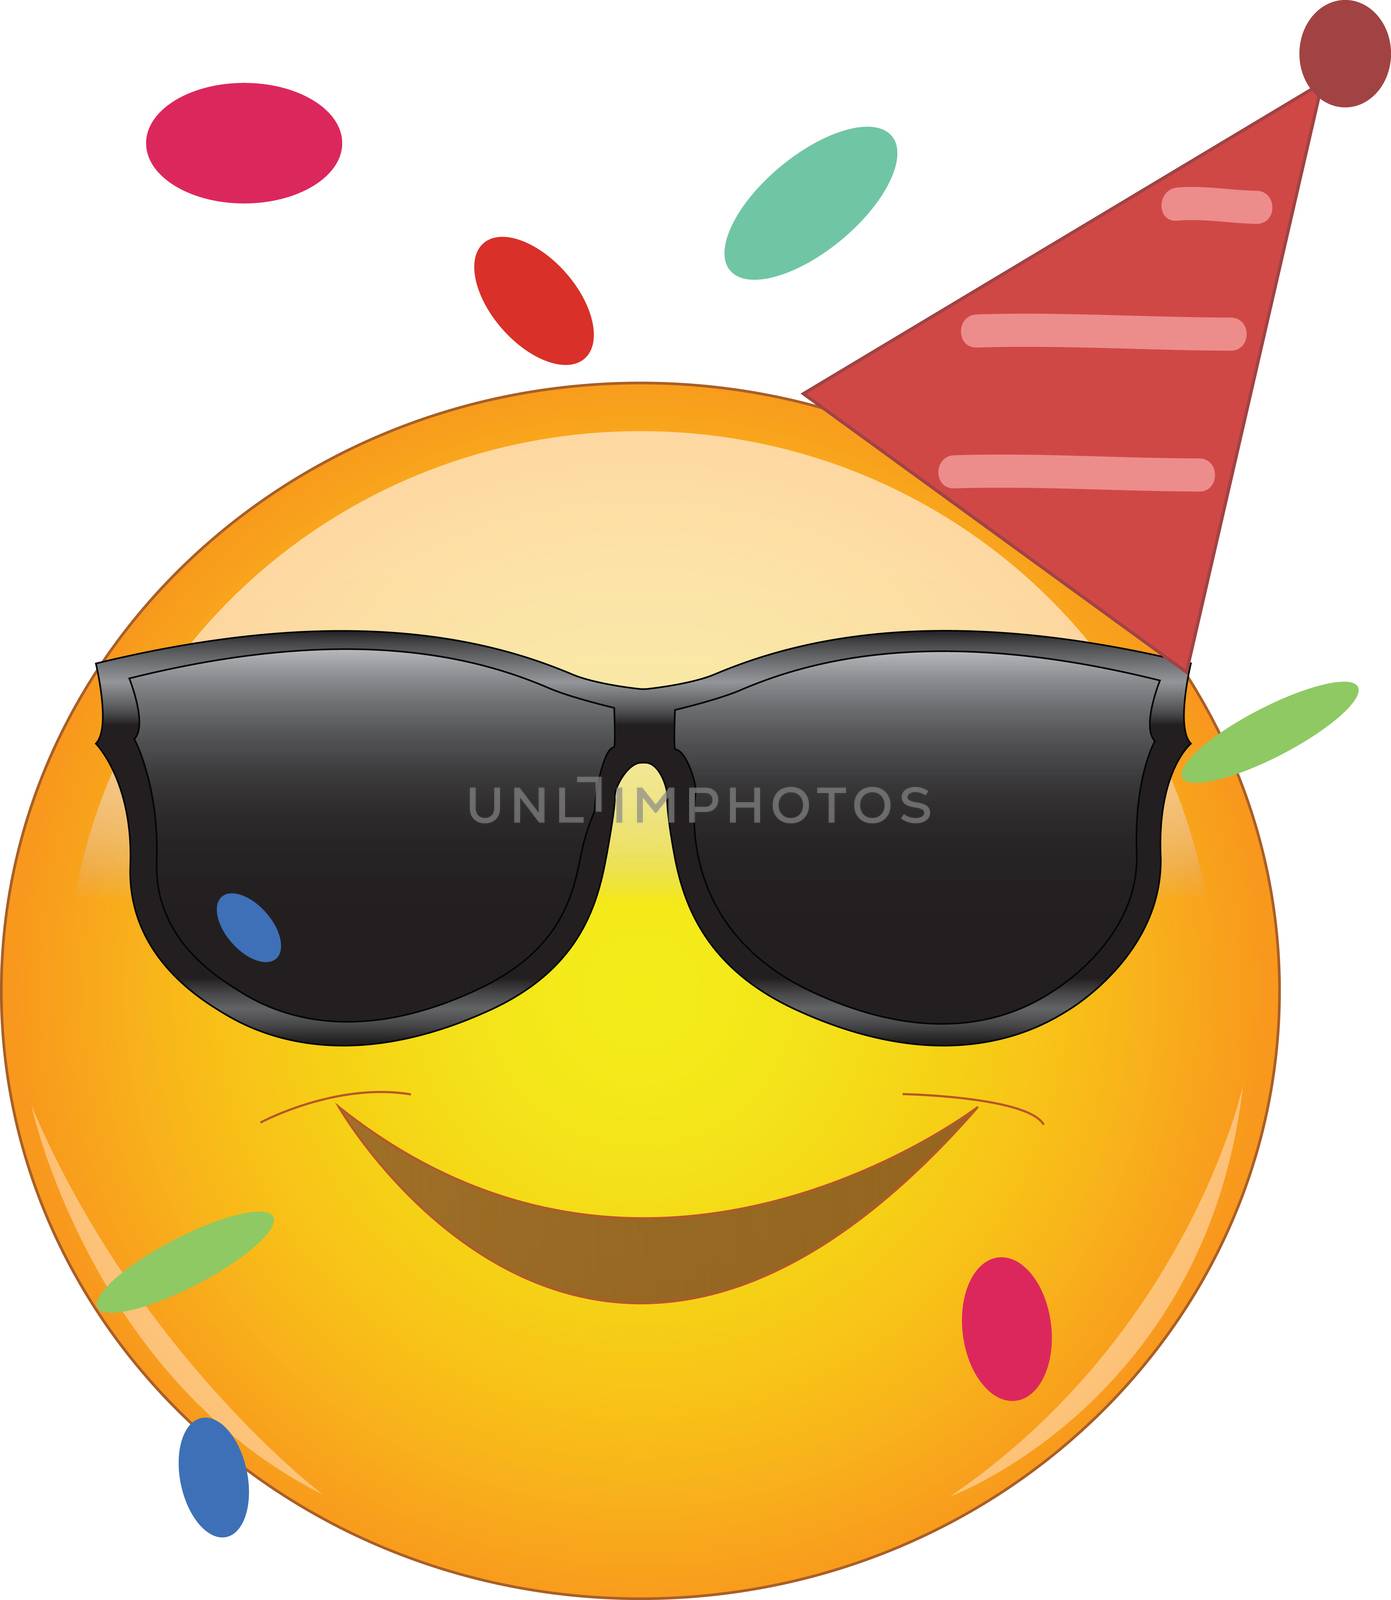 Cool emoji wearing a party hut, sunglasses and confetti flying around. Party emoticon with round yellow face and smiling. Expression of fun, good time, joy, partying and celebrating.